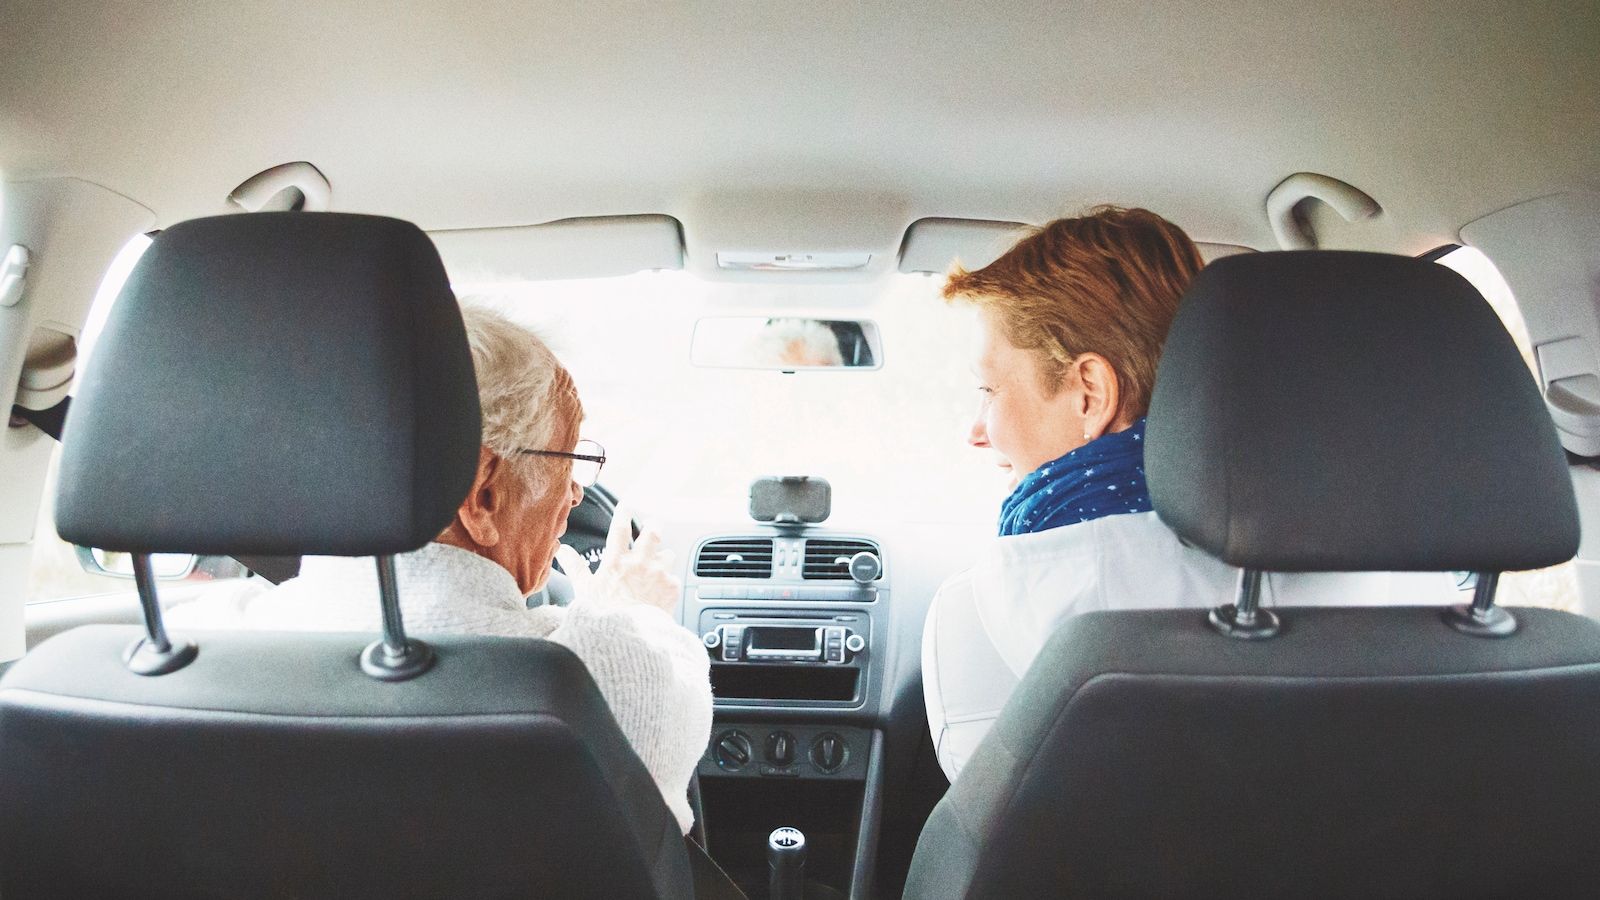 Discussing driving with your aging parent: How to proceed with care and compassion